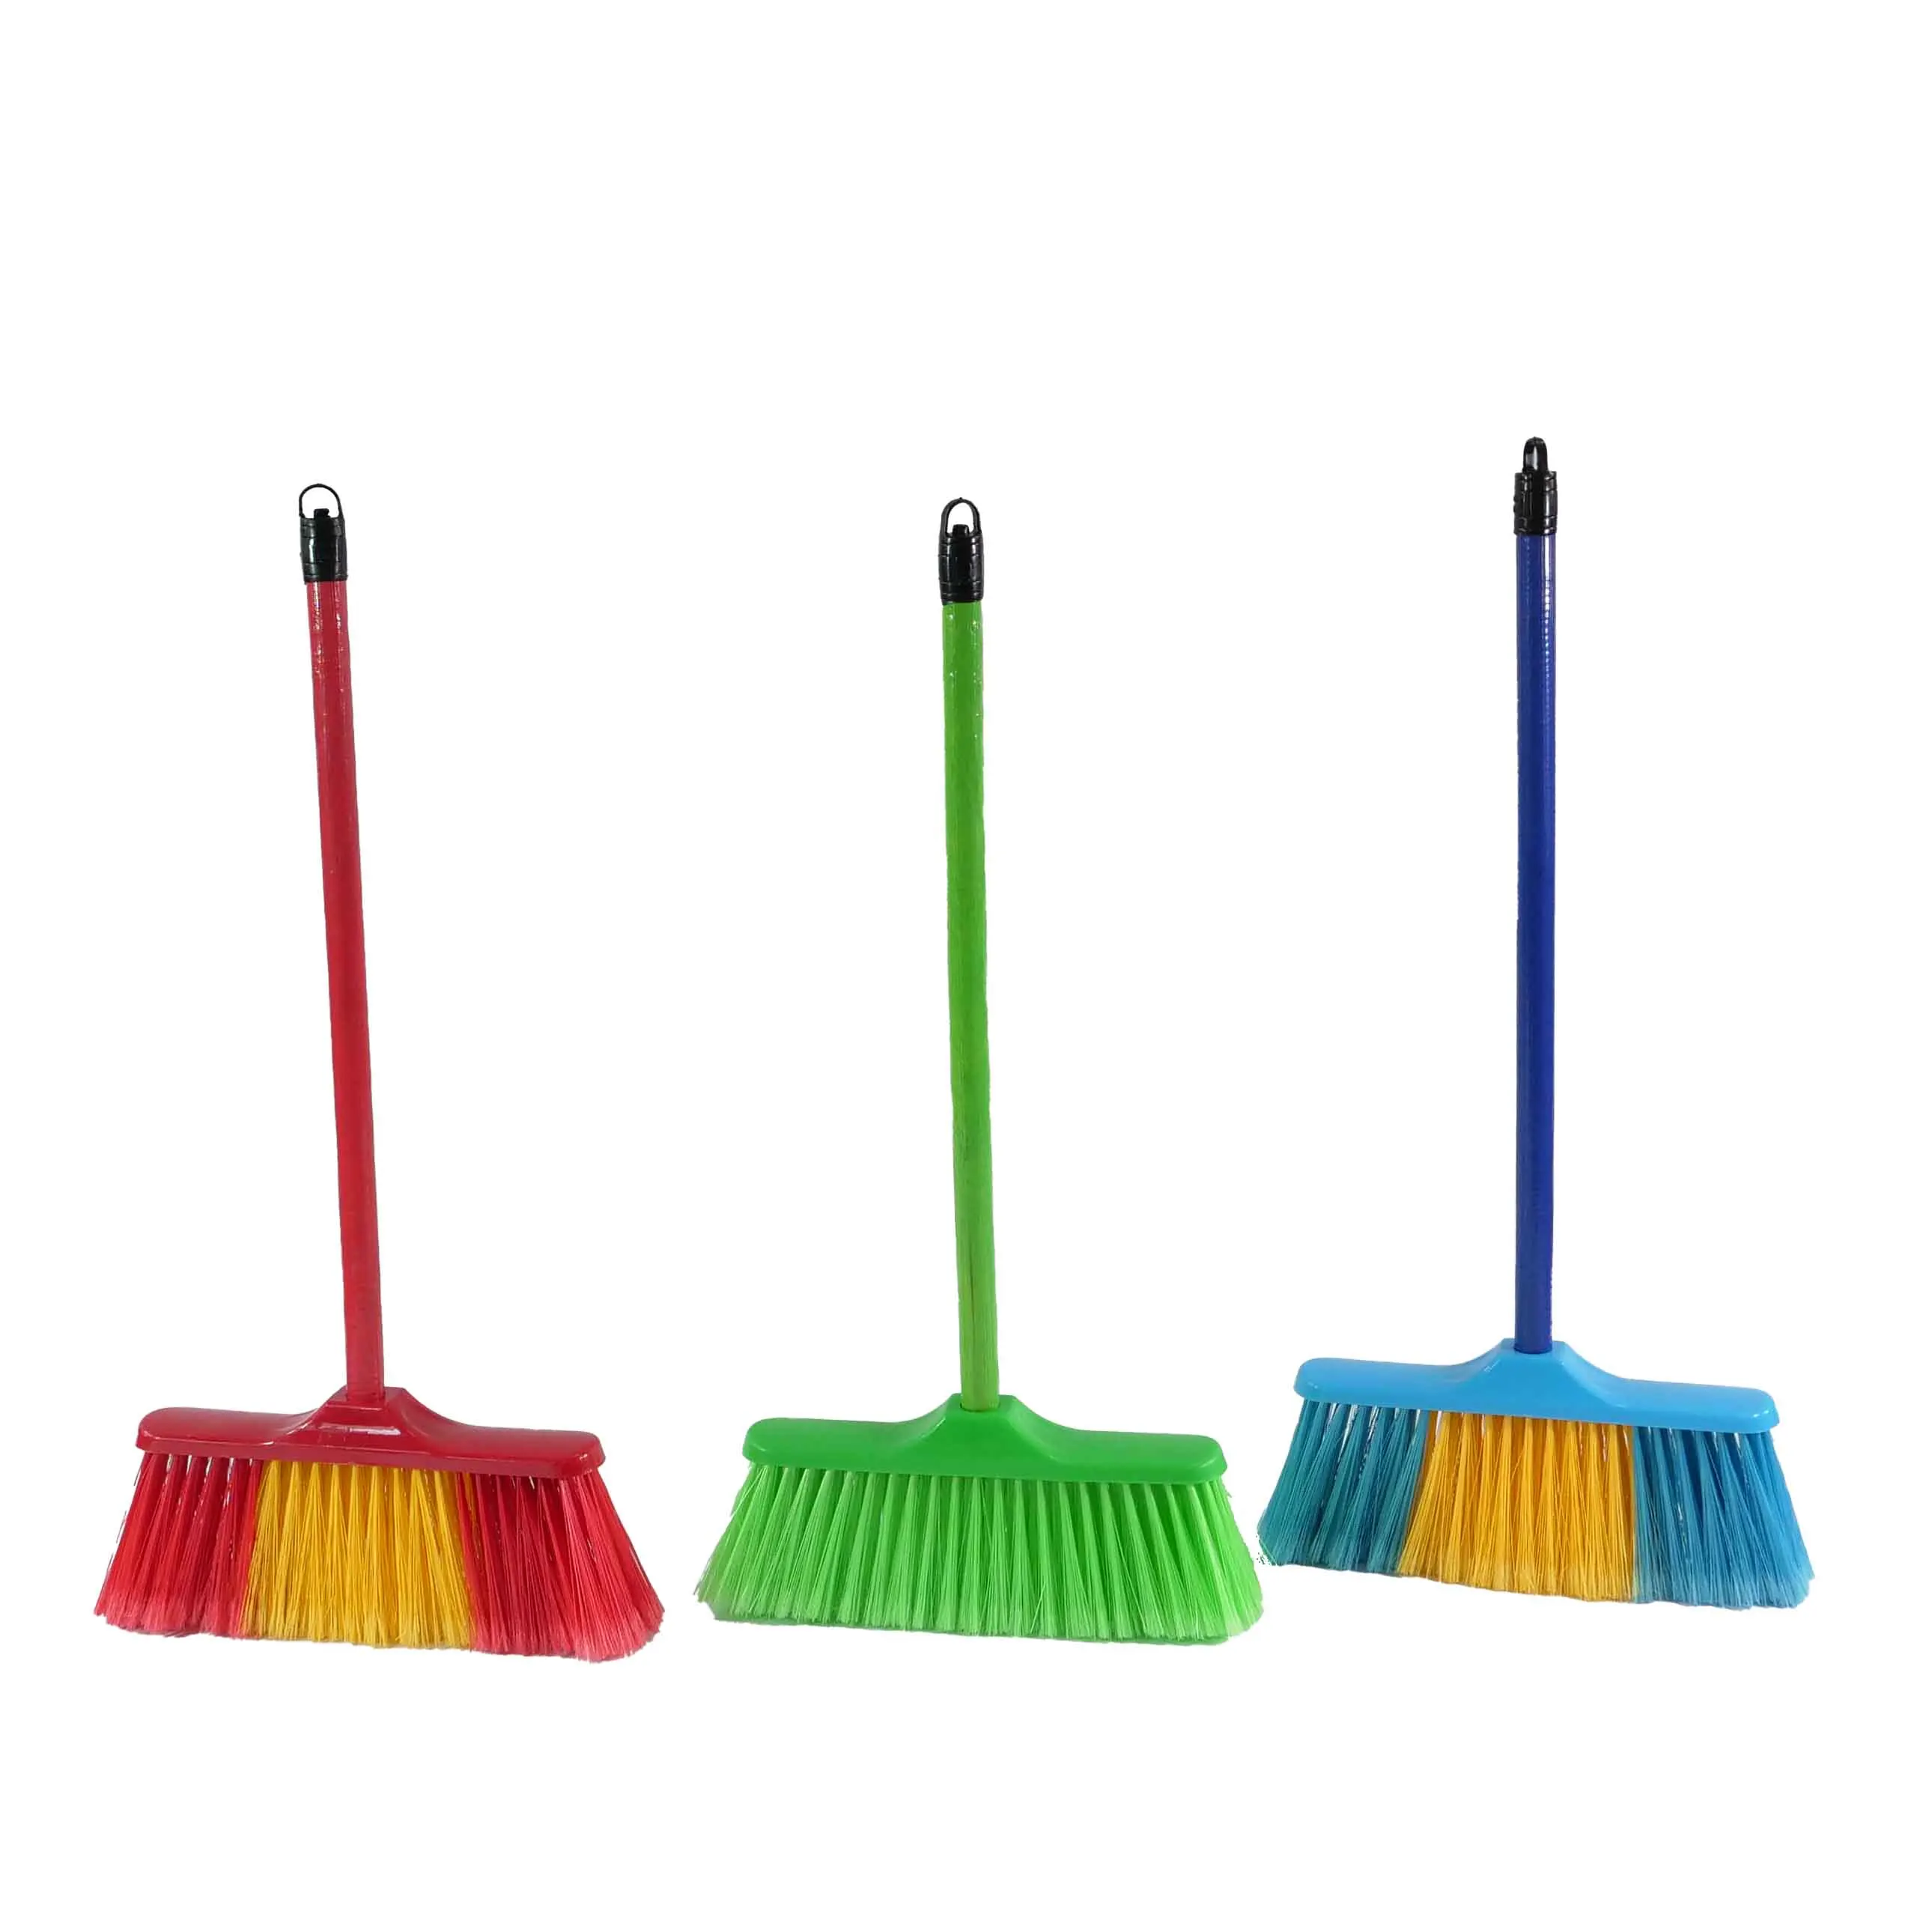 China Supplier Factory soft brooms best price plastic Household broom